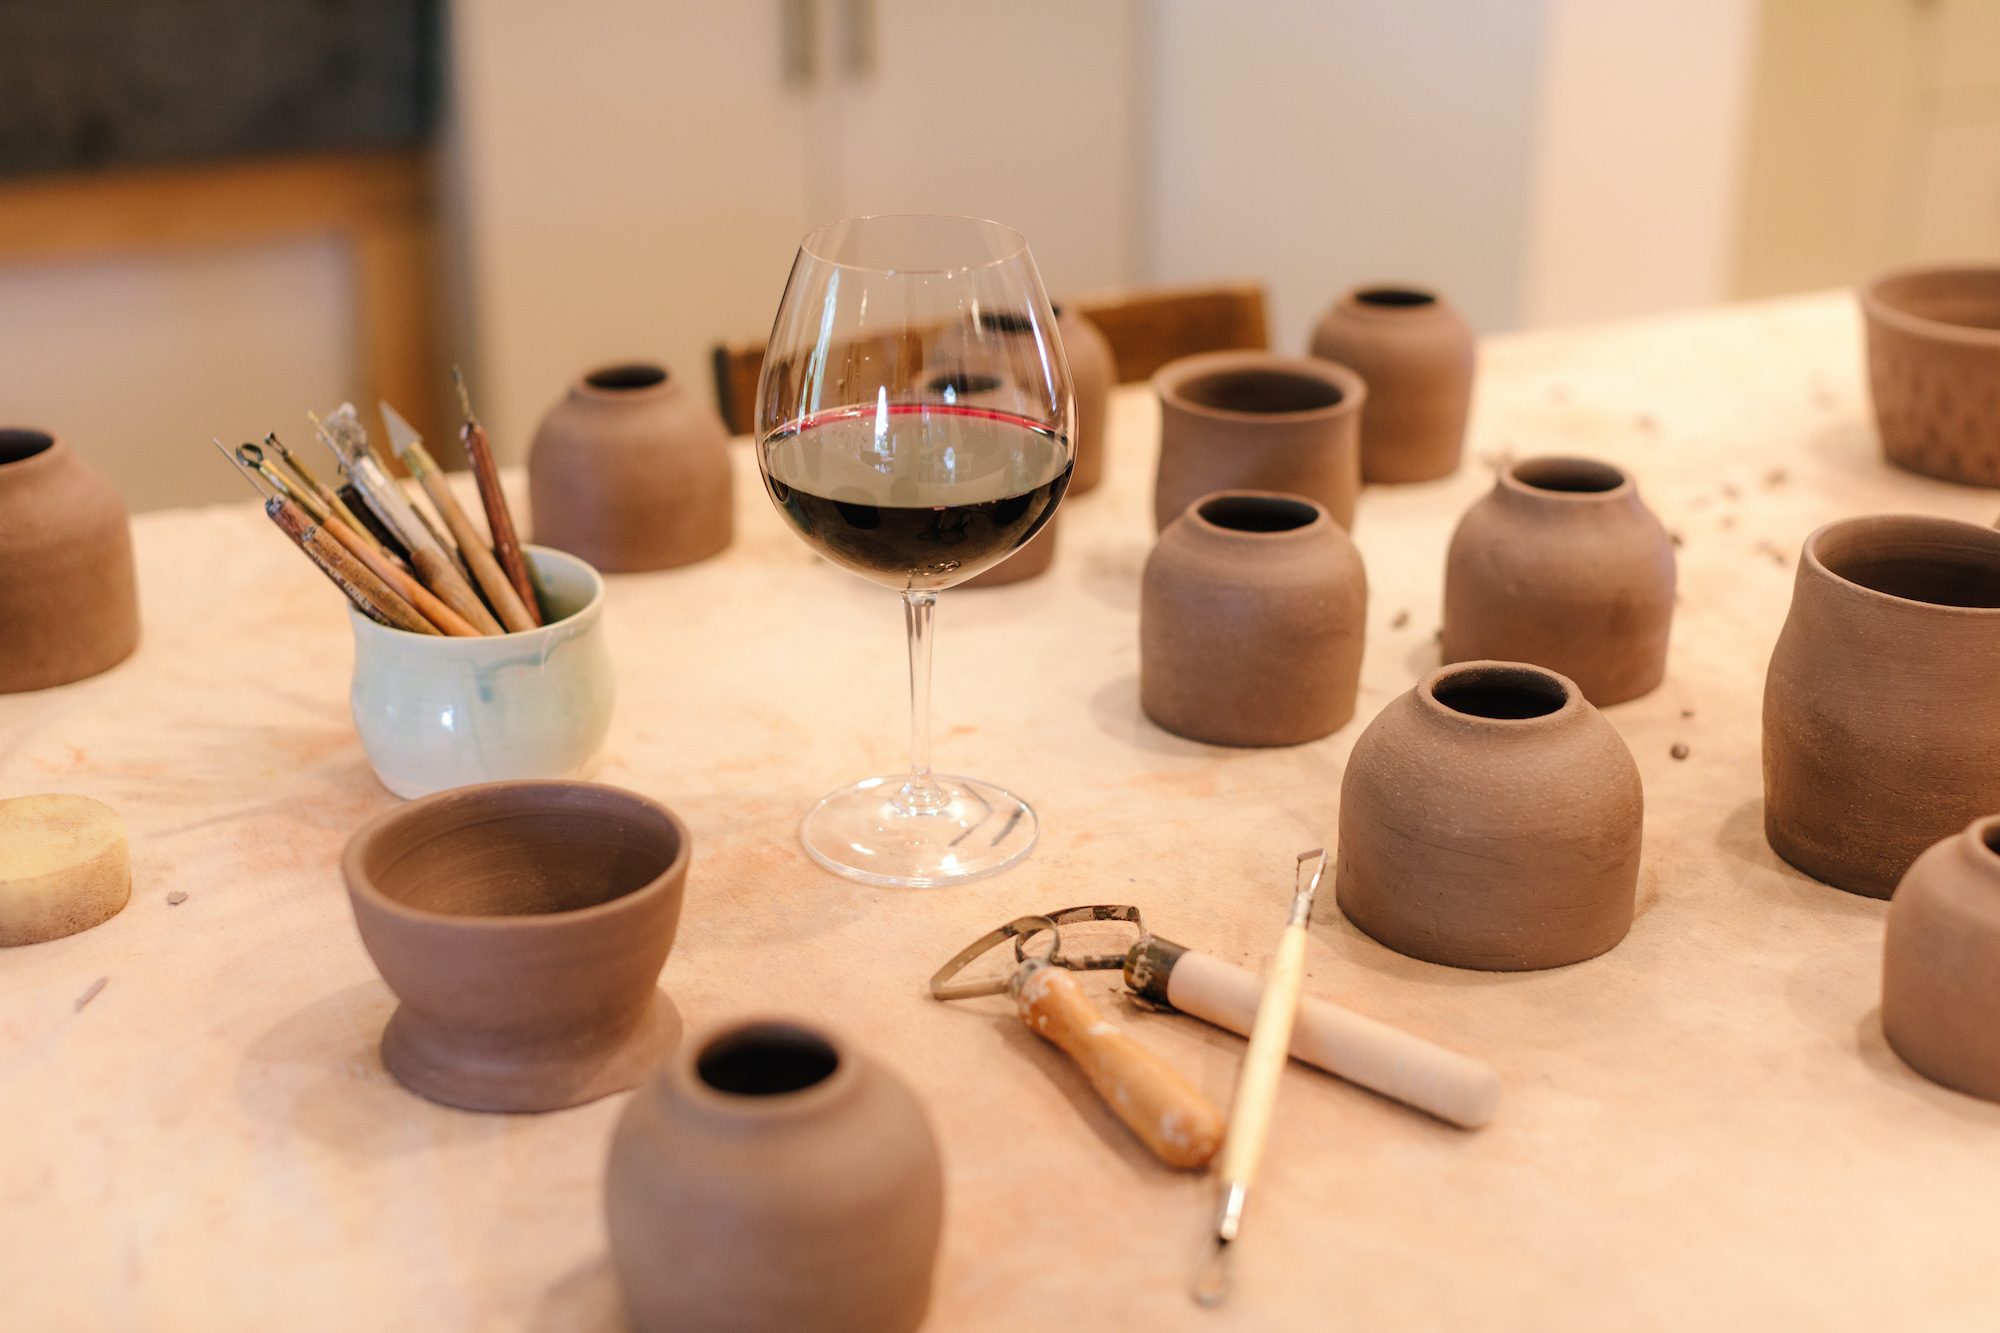 a table with several small, un-fired pots and a glass of wine